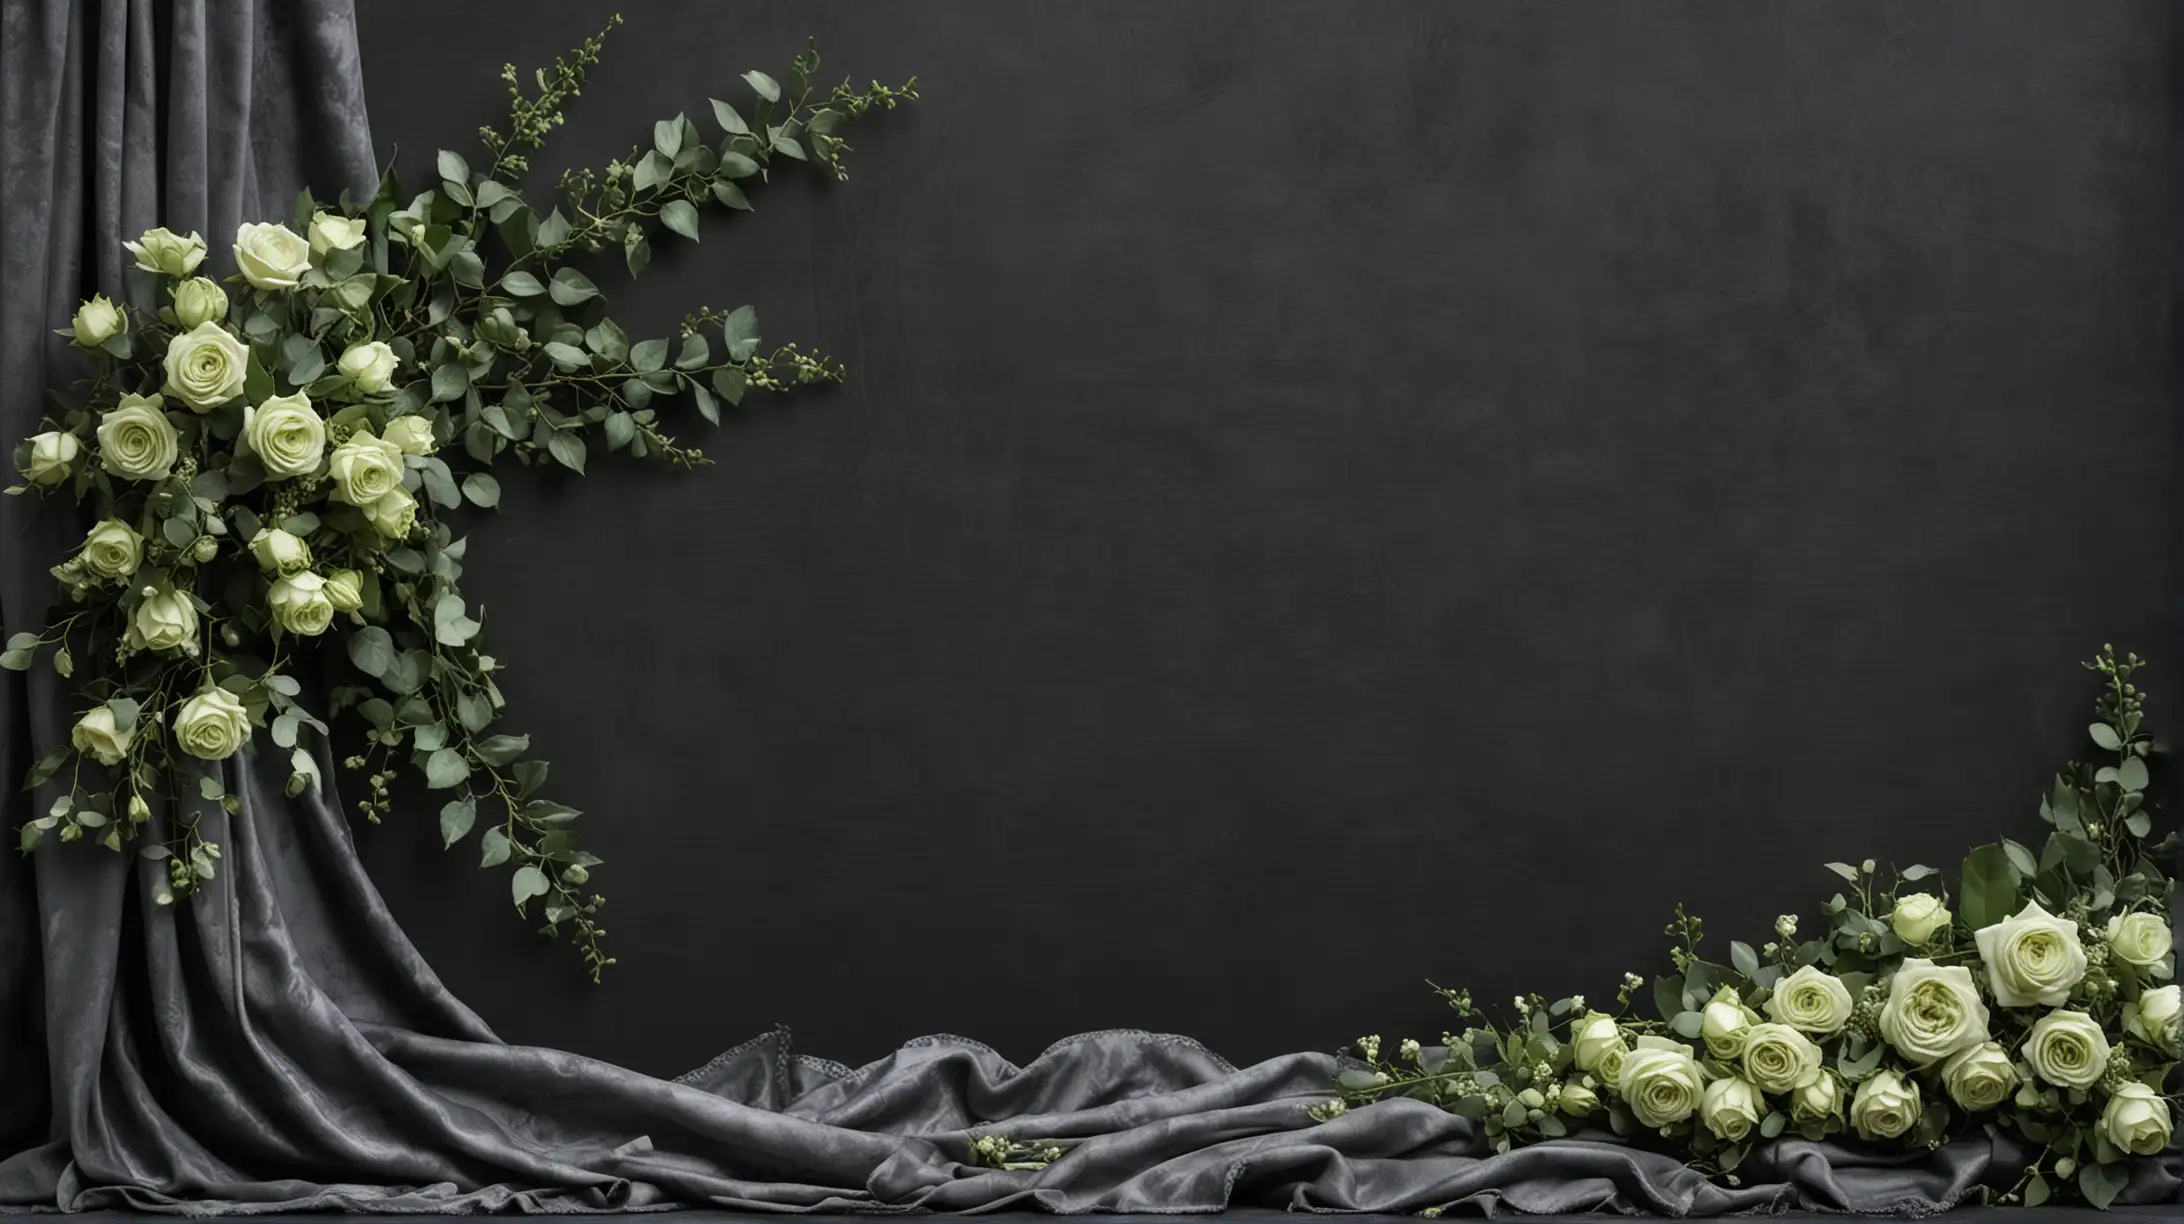 left side border, draped dark gray fabric on which lies a few beautiful light green roses gypsophila and ivy, dark gray velvet background